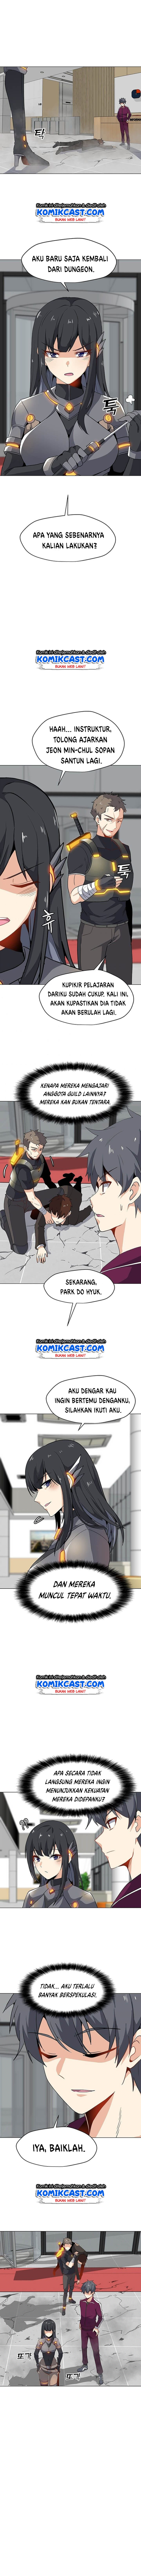 Solo Spell Caster Chapter 15